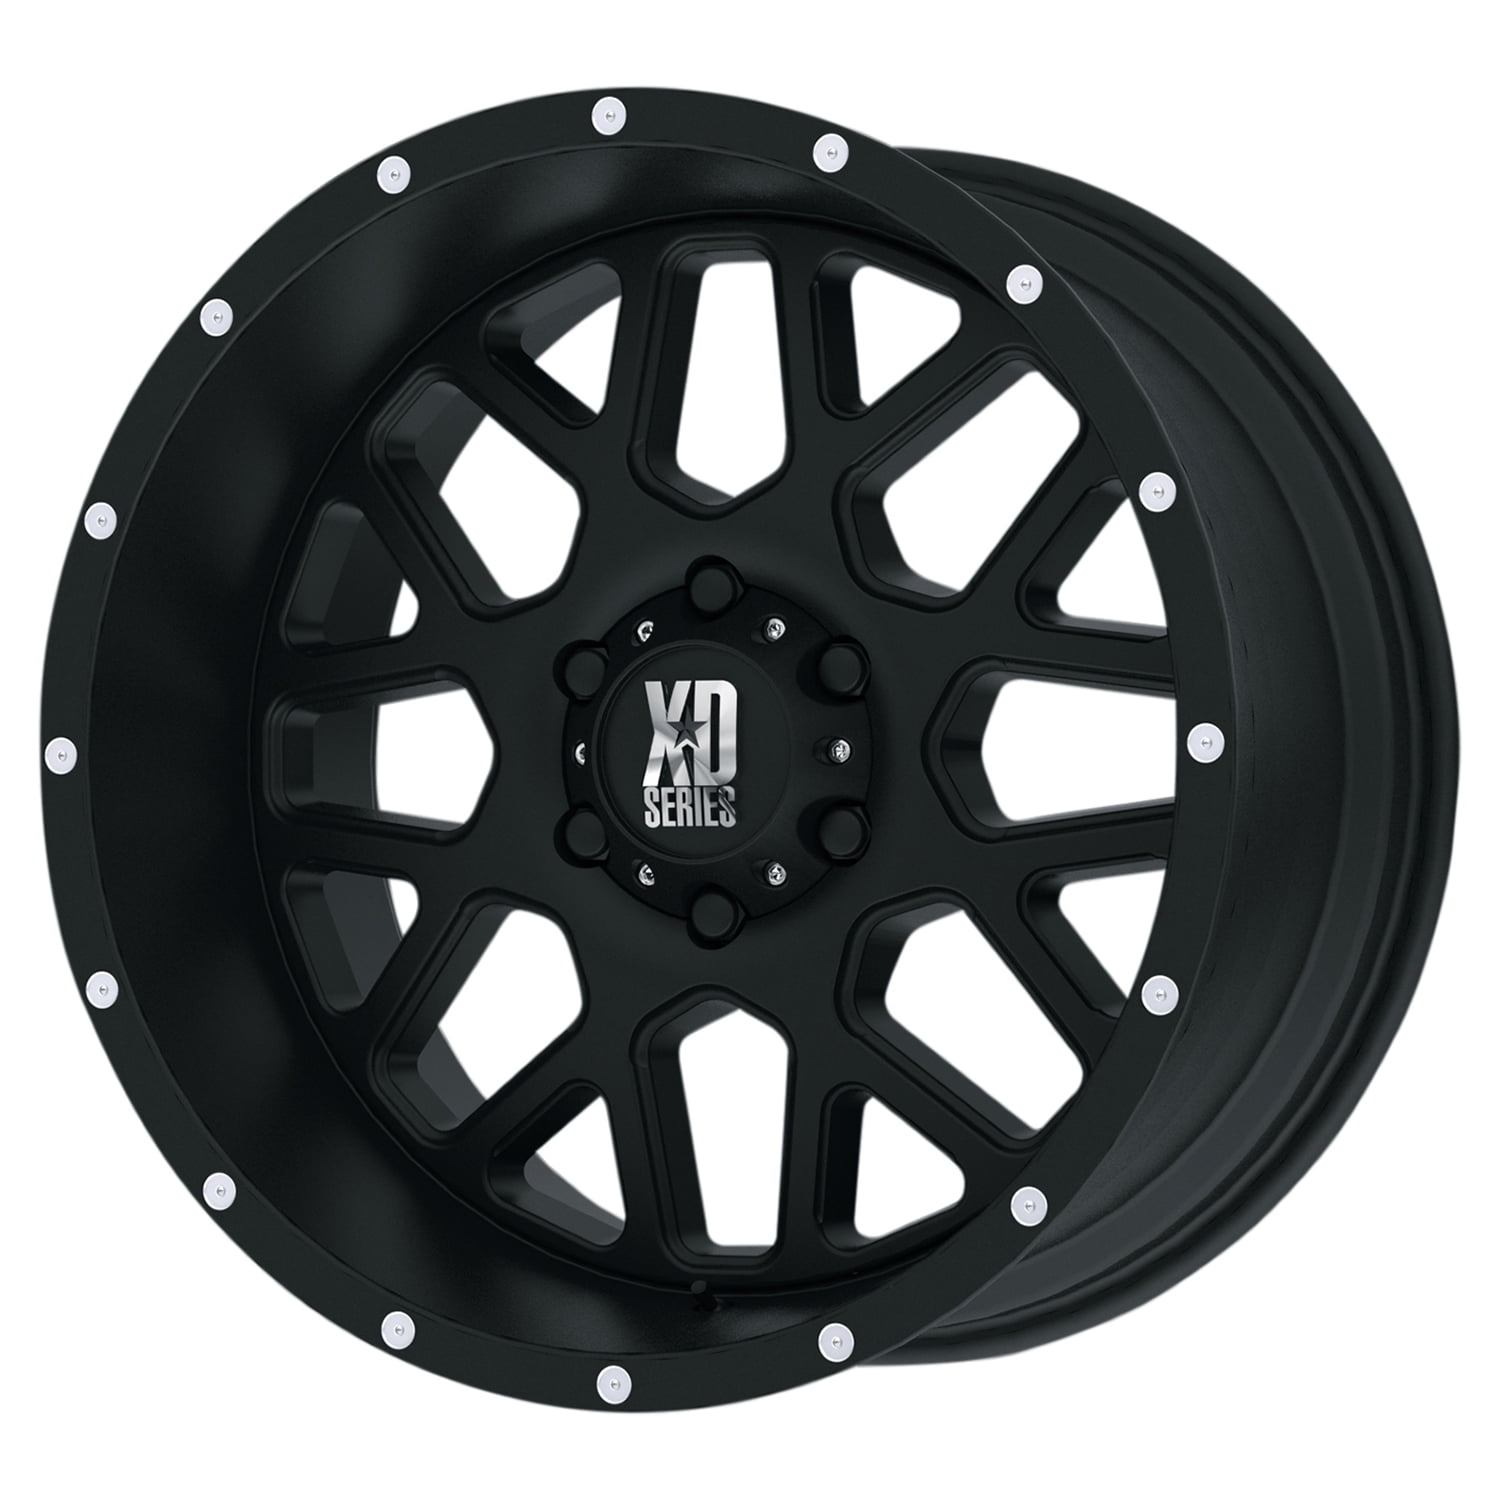 XD Series by KMC Wheels XD820 Grenade Satin Black Wheel with Milled Spokes 20x10/6x139.7mm, -24mm offset 